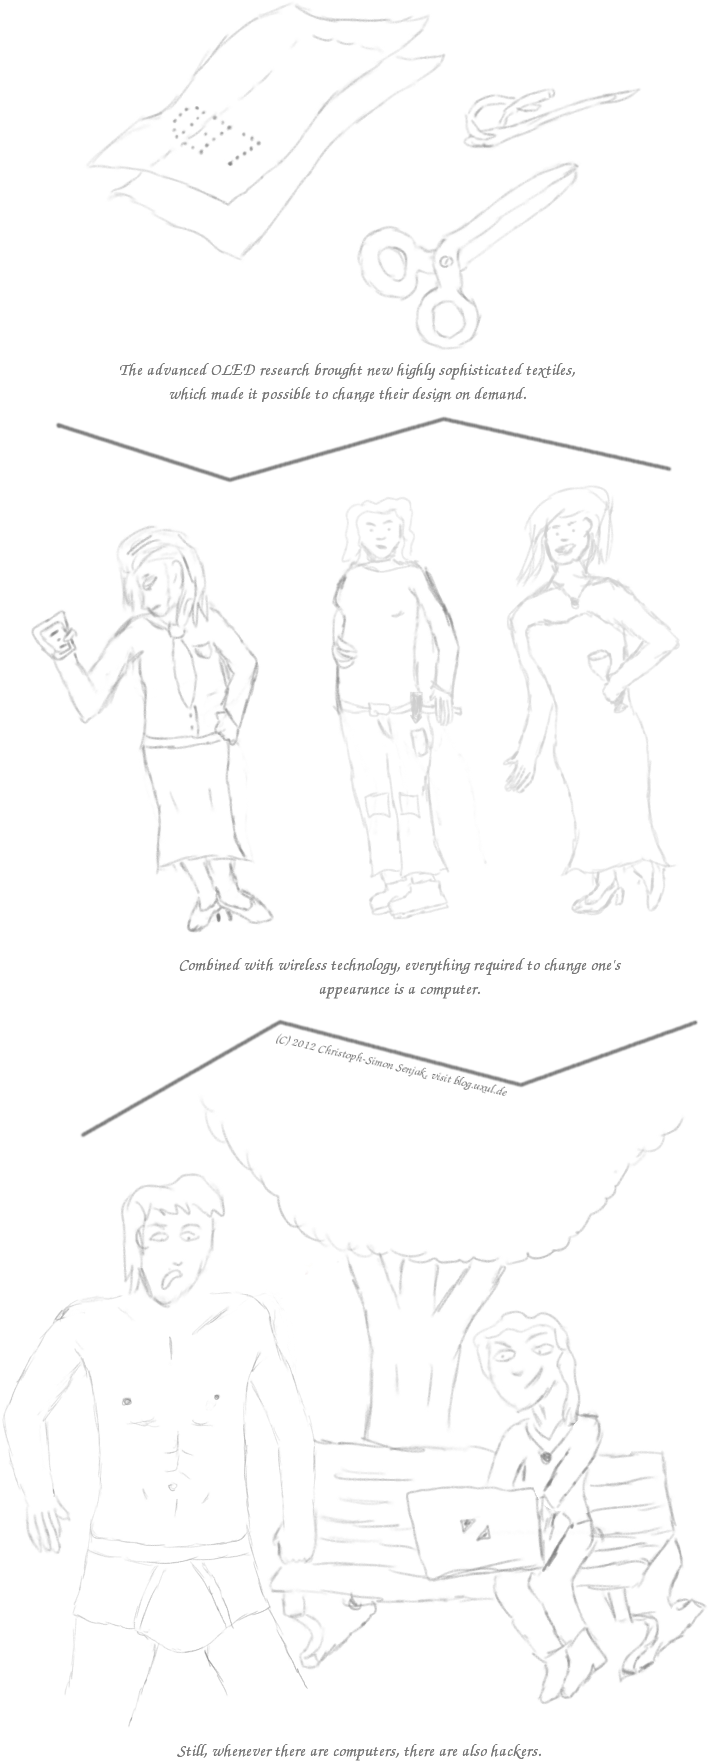 Panel 1: A transparent foil with dots showing "LED", a needle with a thread, and scissors are shown. Subtitle: "The advanced OLED research brought new highly sophisticated textiles, which made it possible to change their design on demand." -- Panel 2: A female model is shown in three different outfits. Subtitle: "Combined with wireless technology, everything required to change one's appearance is a computer." -- Panel 3: A woman with a laptop is sitting at a park bench, venmously grinning. In front of her stands a shocked man in underpants. Subtitle: "Still, whenever there are computers, there are also hackers."